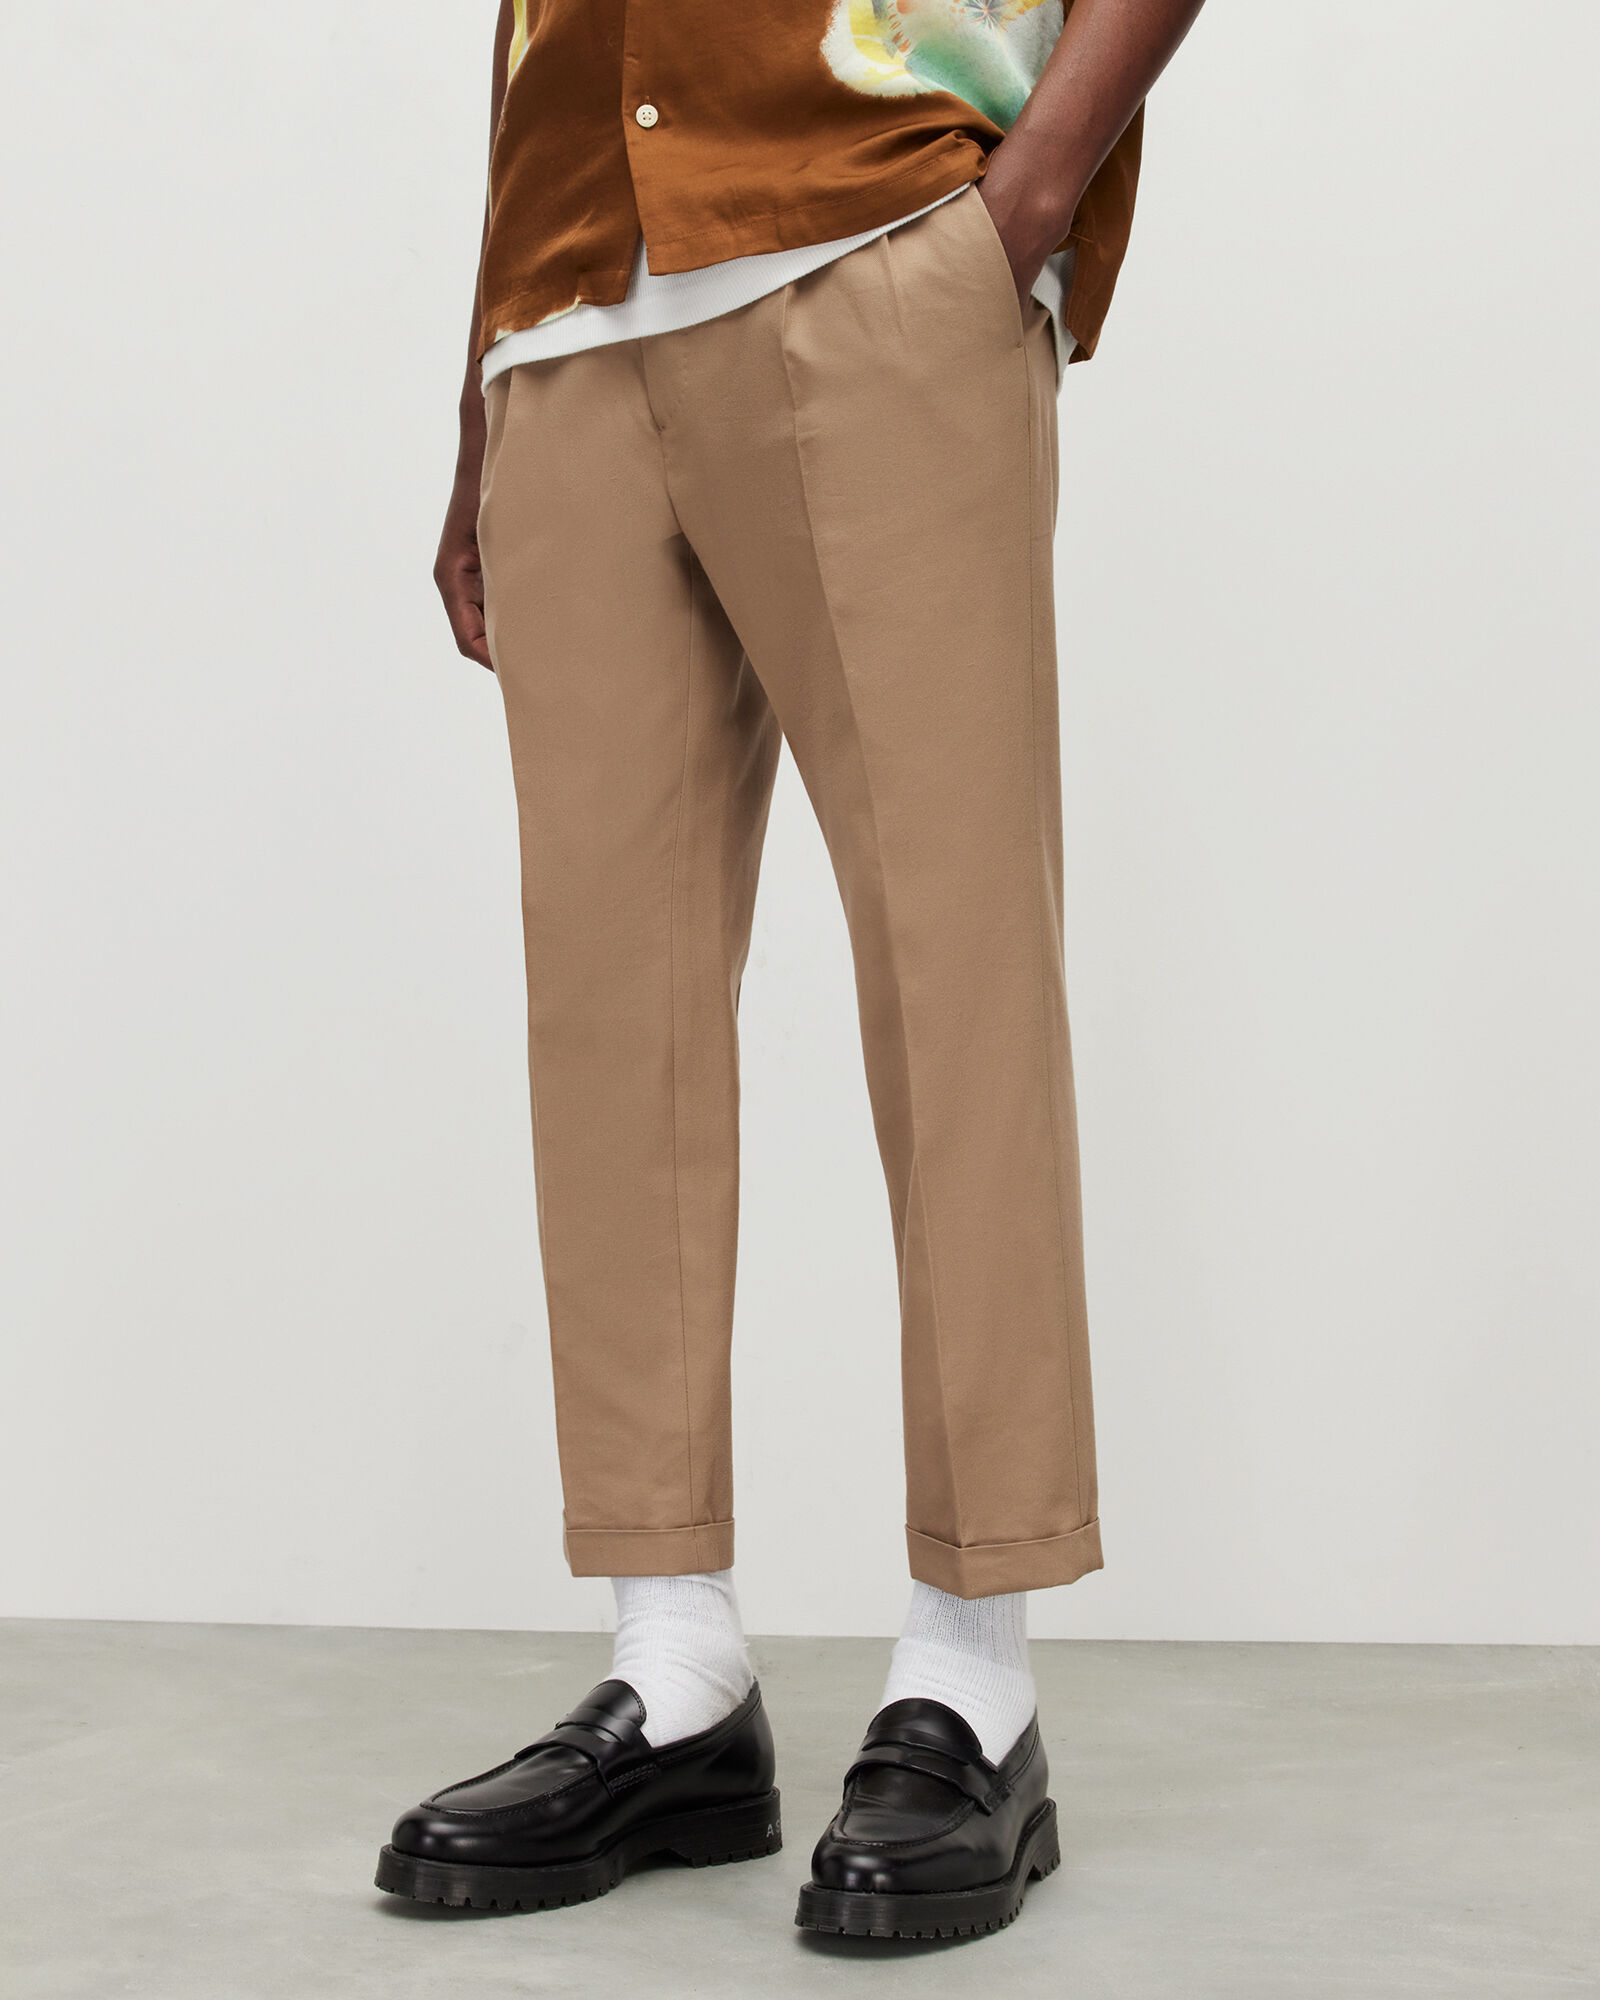 Mens Trousers  Mens Chinos  Trousers  ALLSAINTS